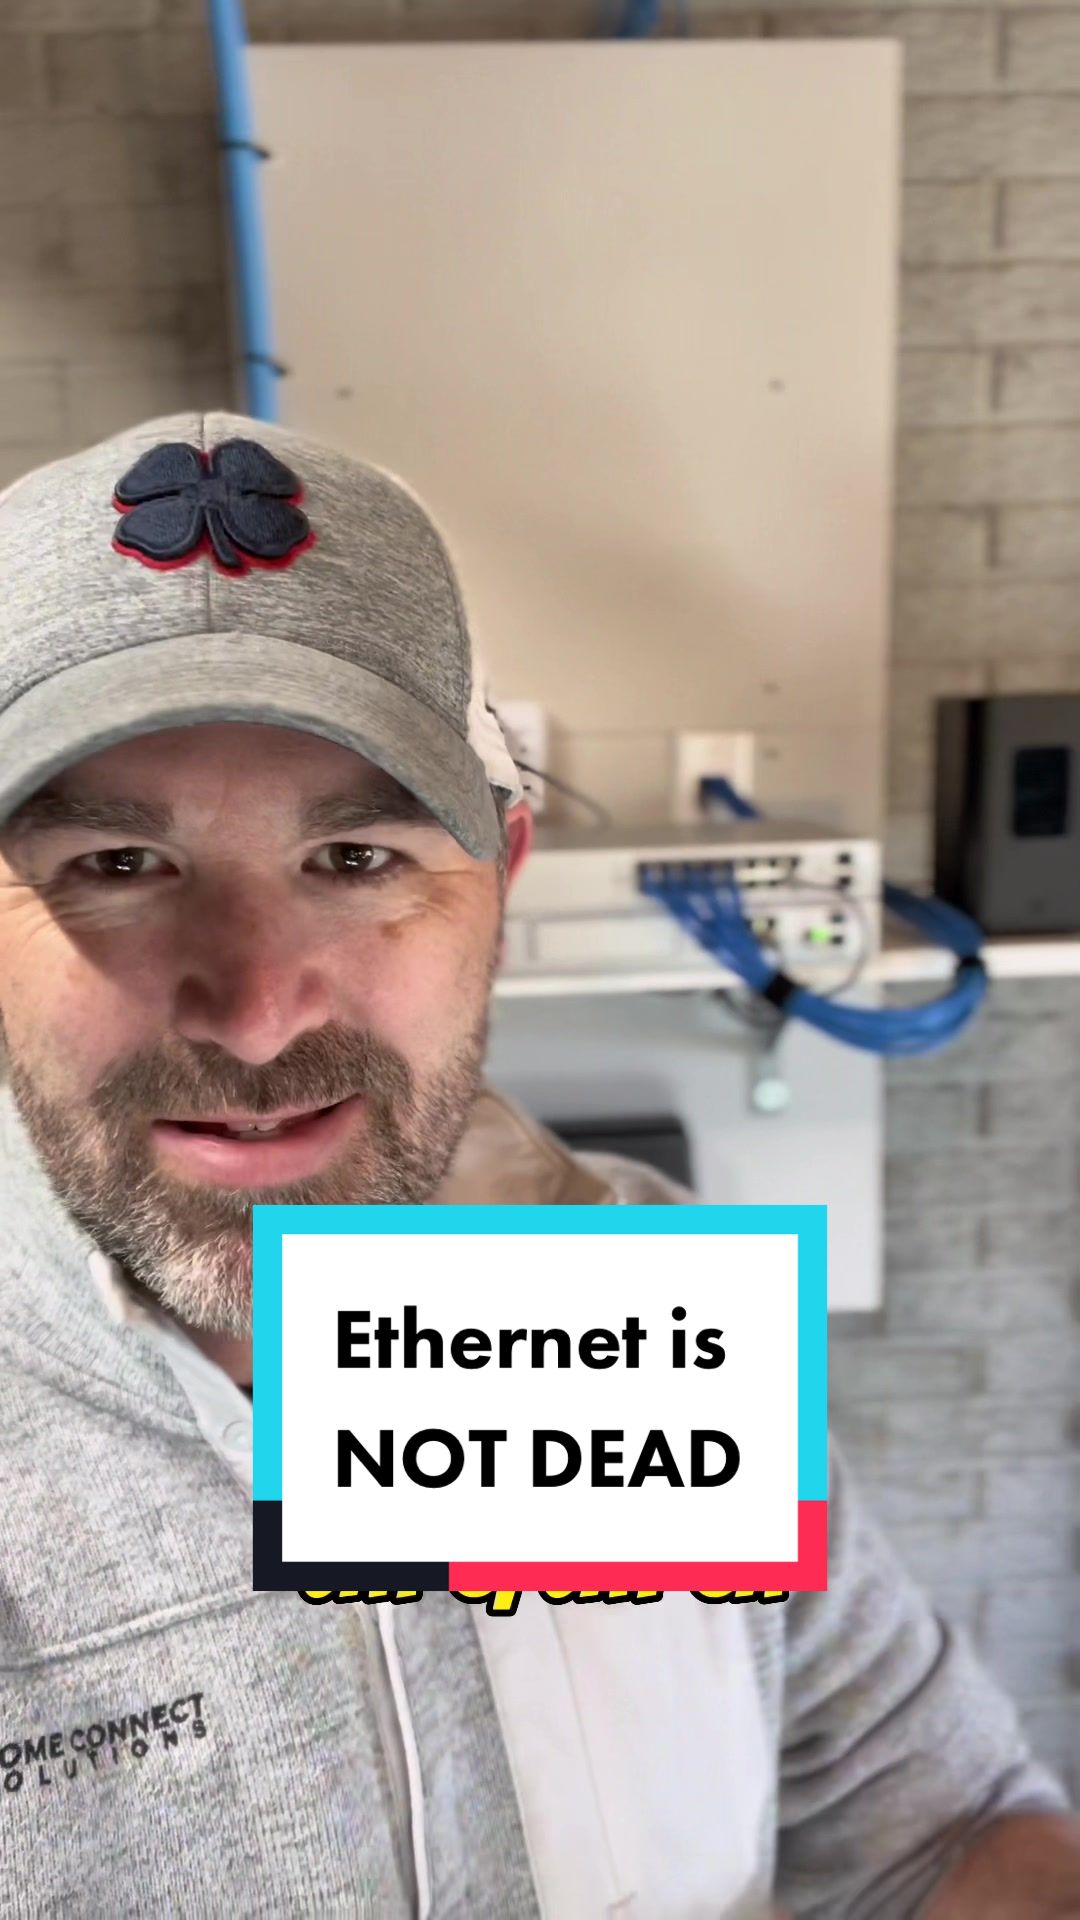 You need to look at putting some sort of Network infrastructure in your new construction home #newconstructionhome #newconstruction #ethernet #homewiring #homeconnectsolutions #ubiquiti #wifi